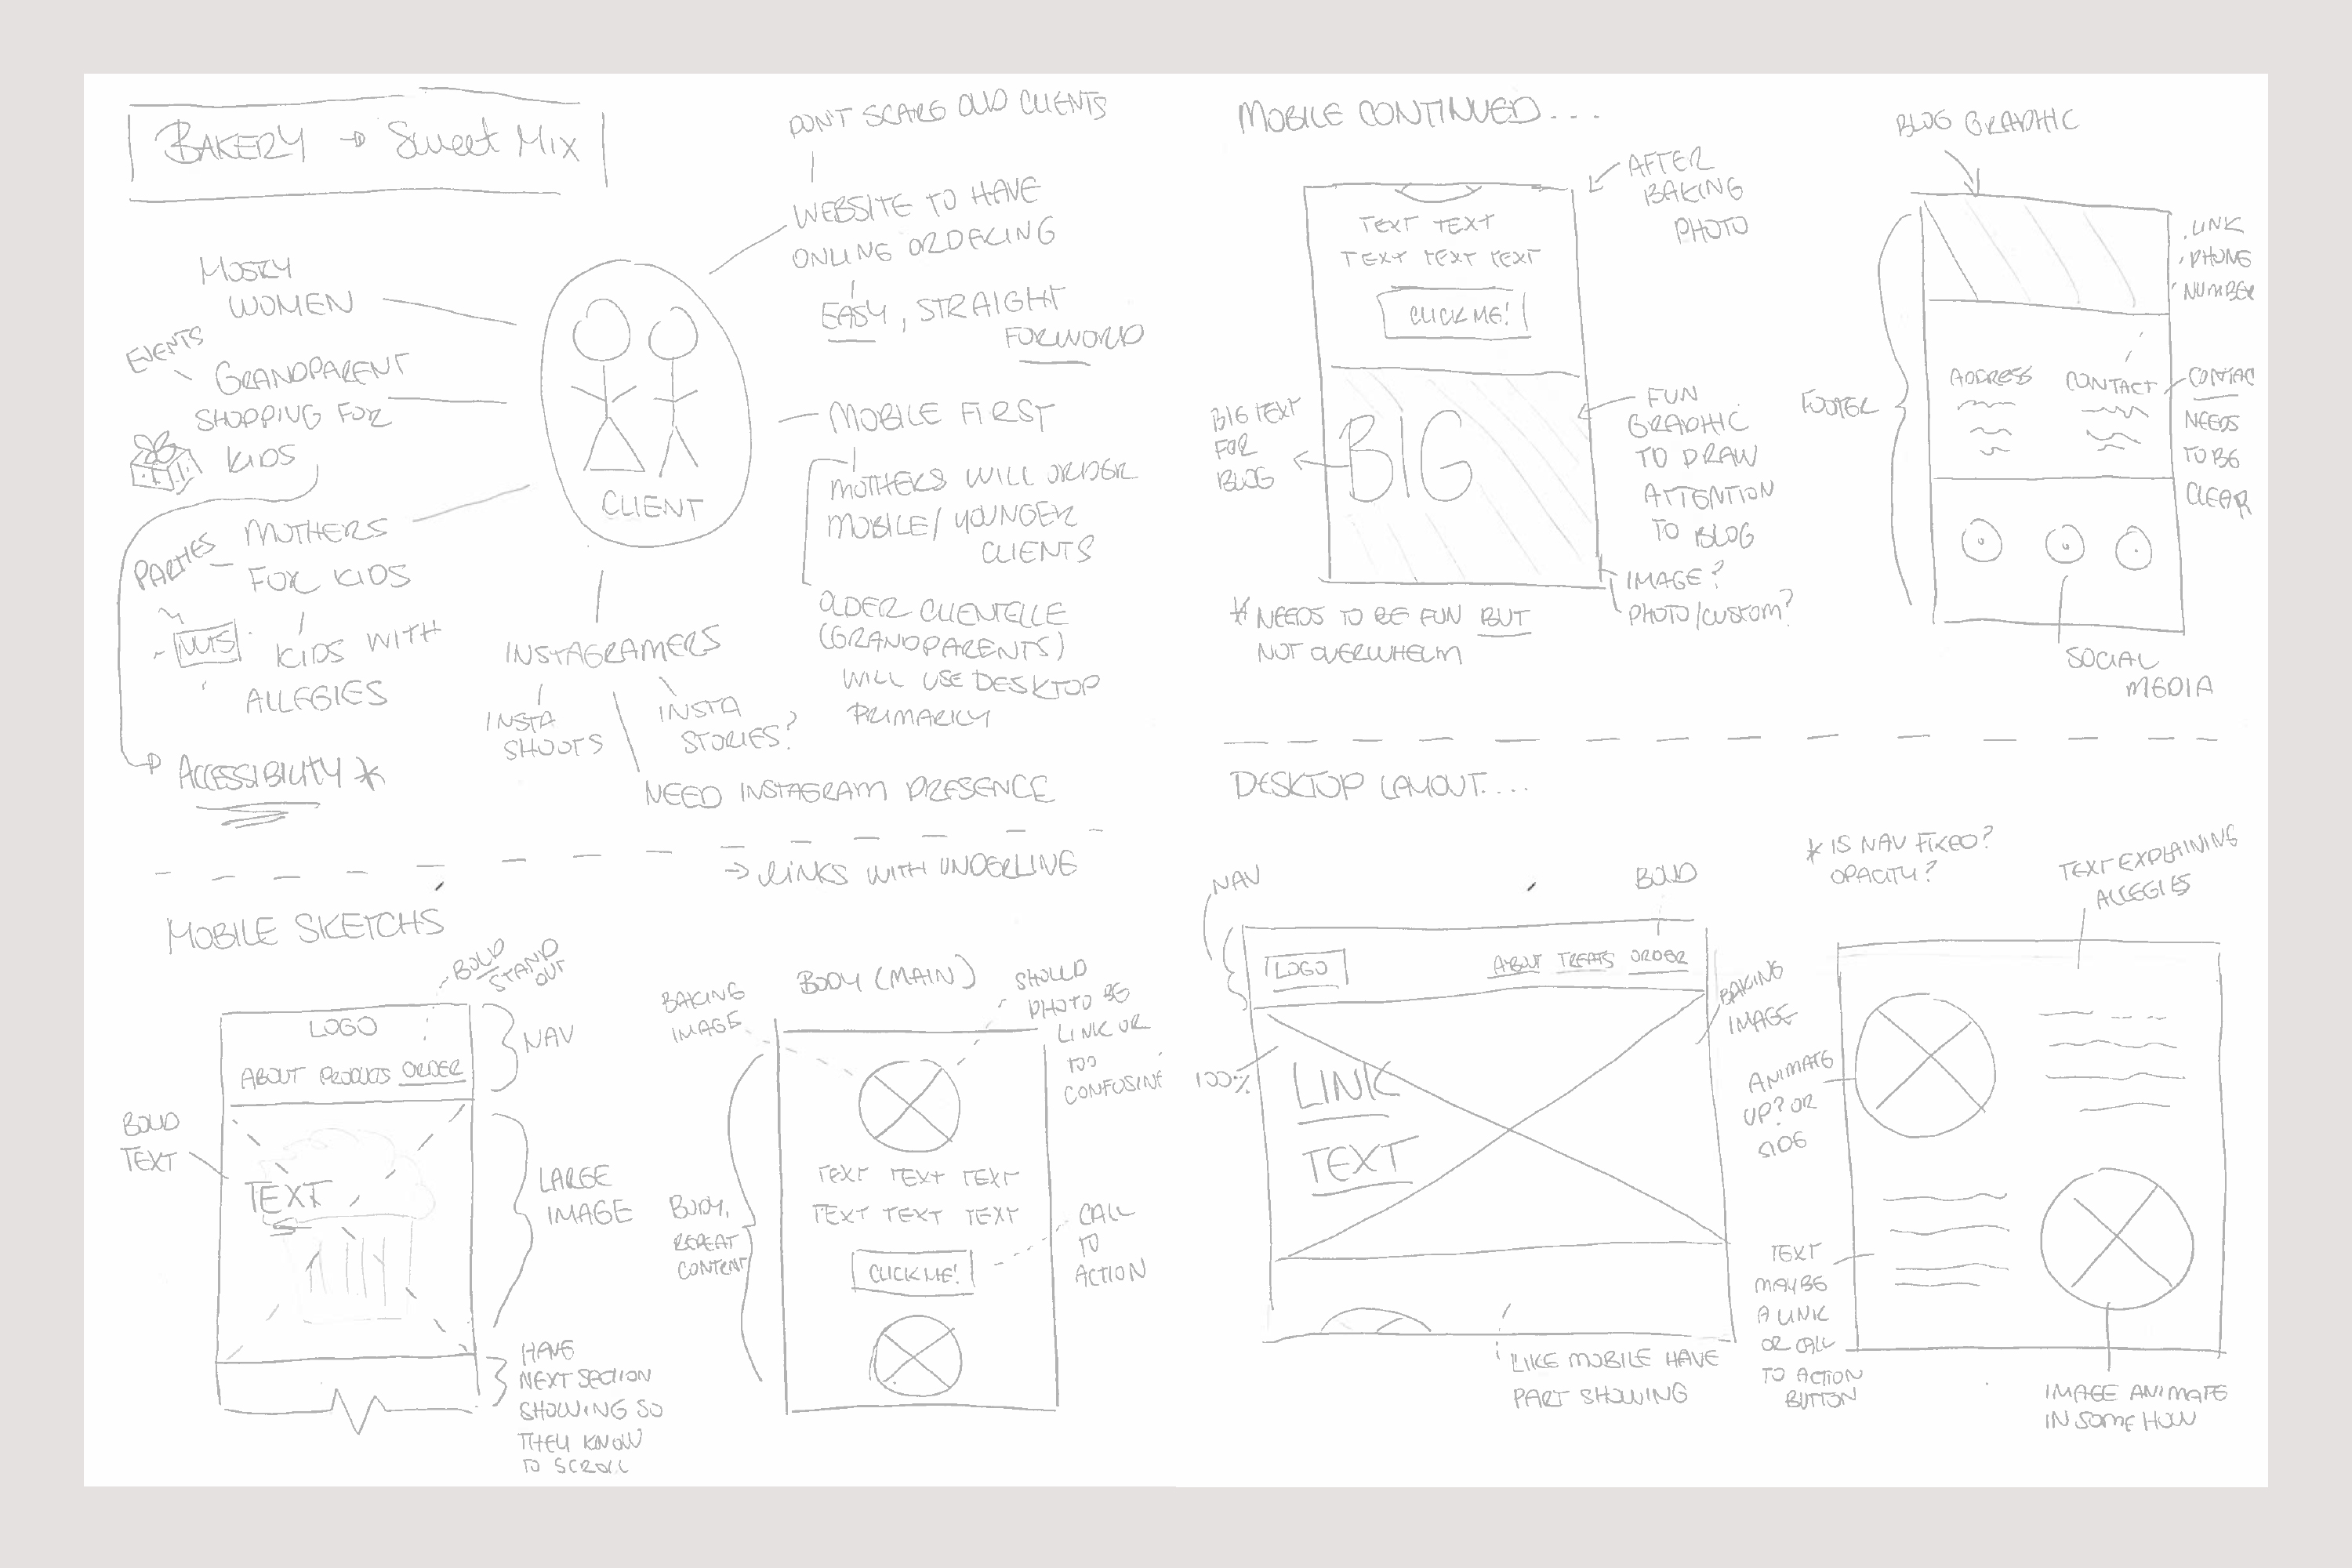 Rough sketches of website layout